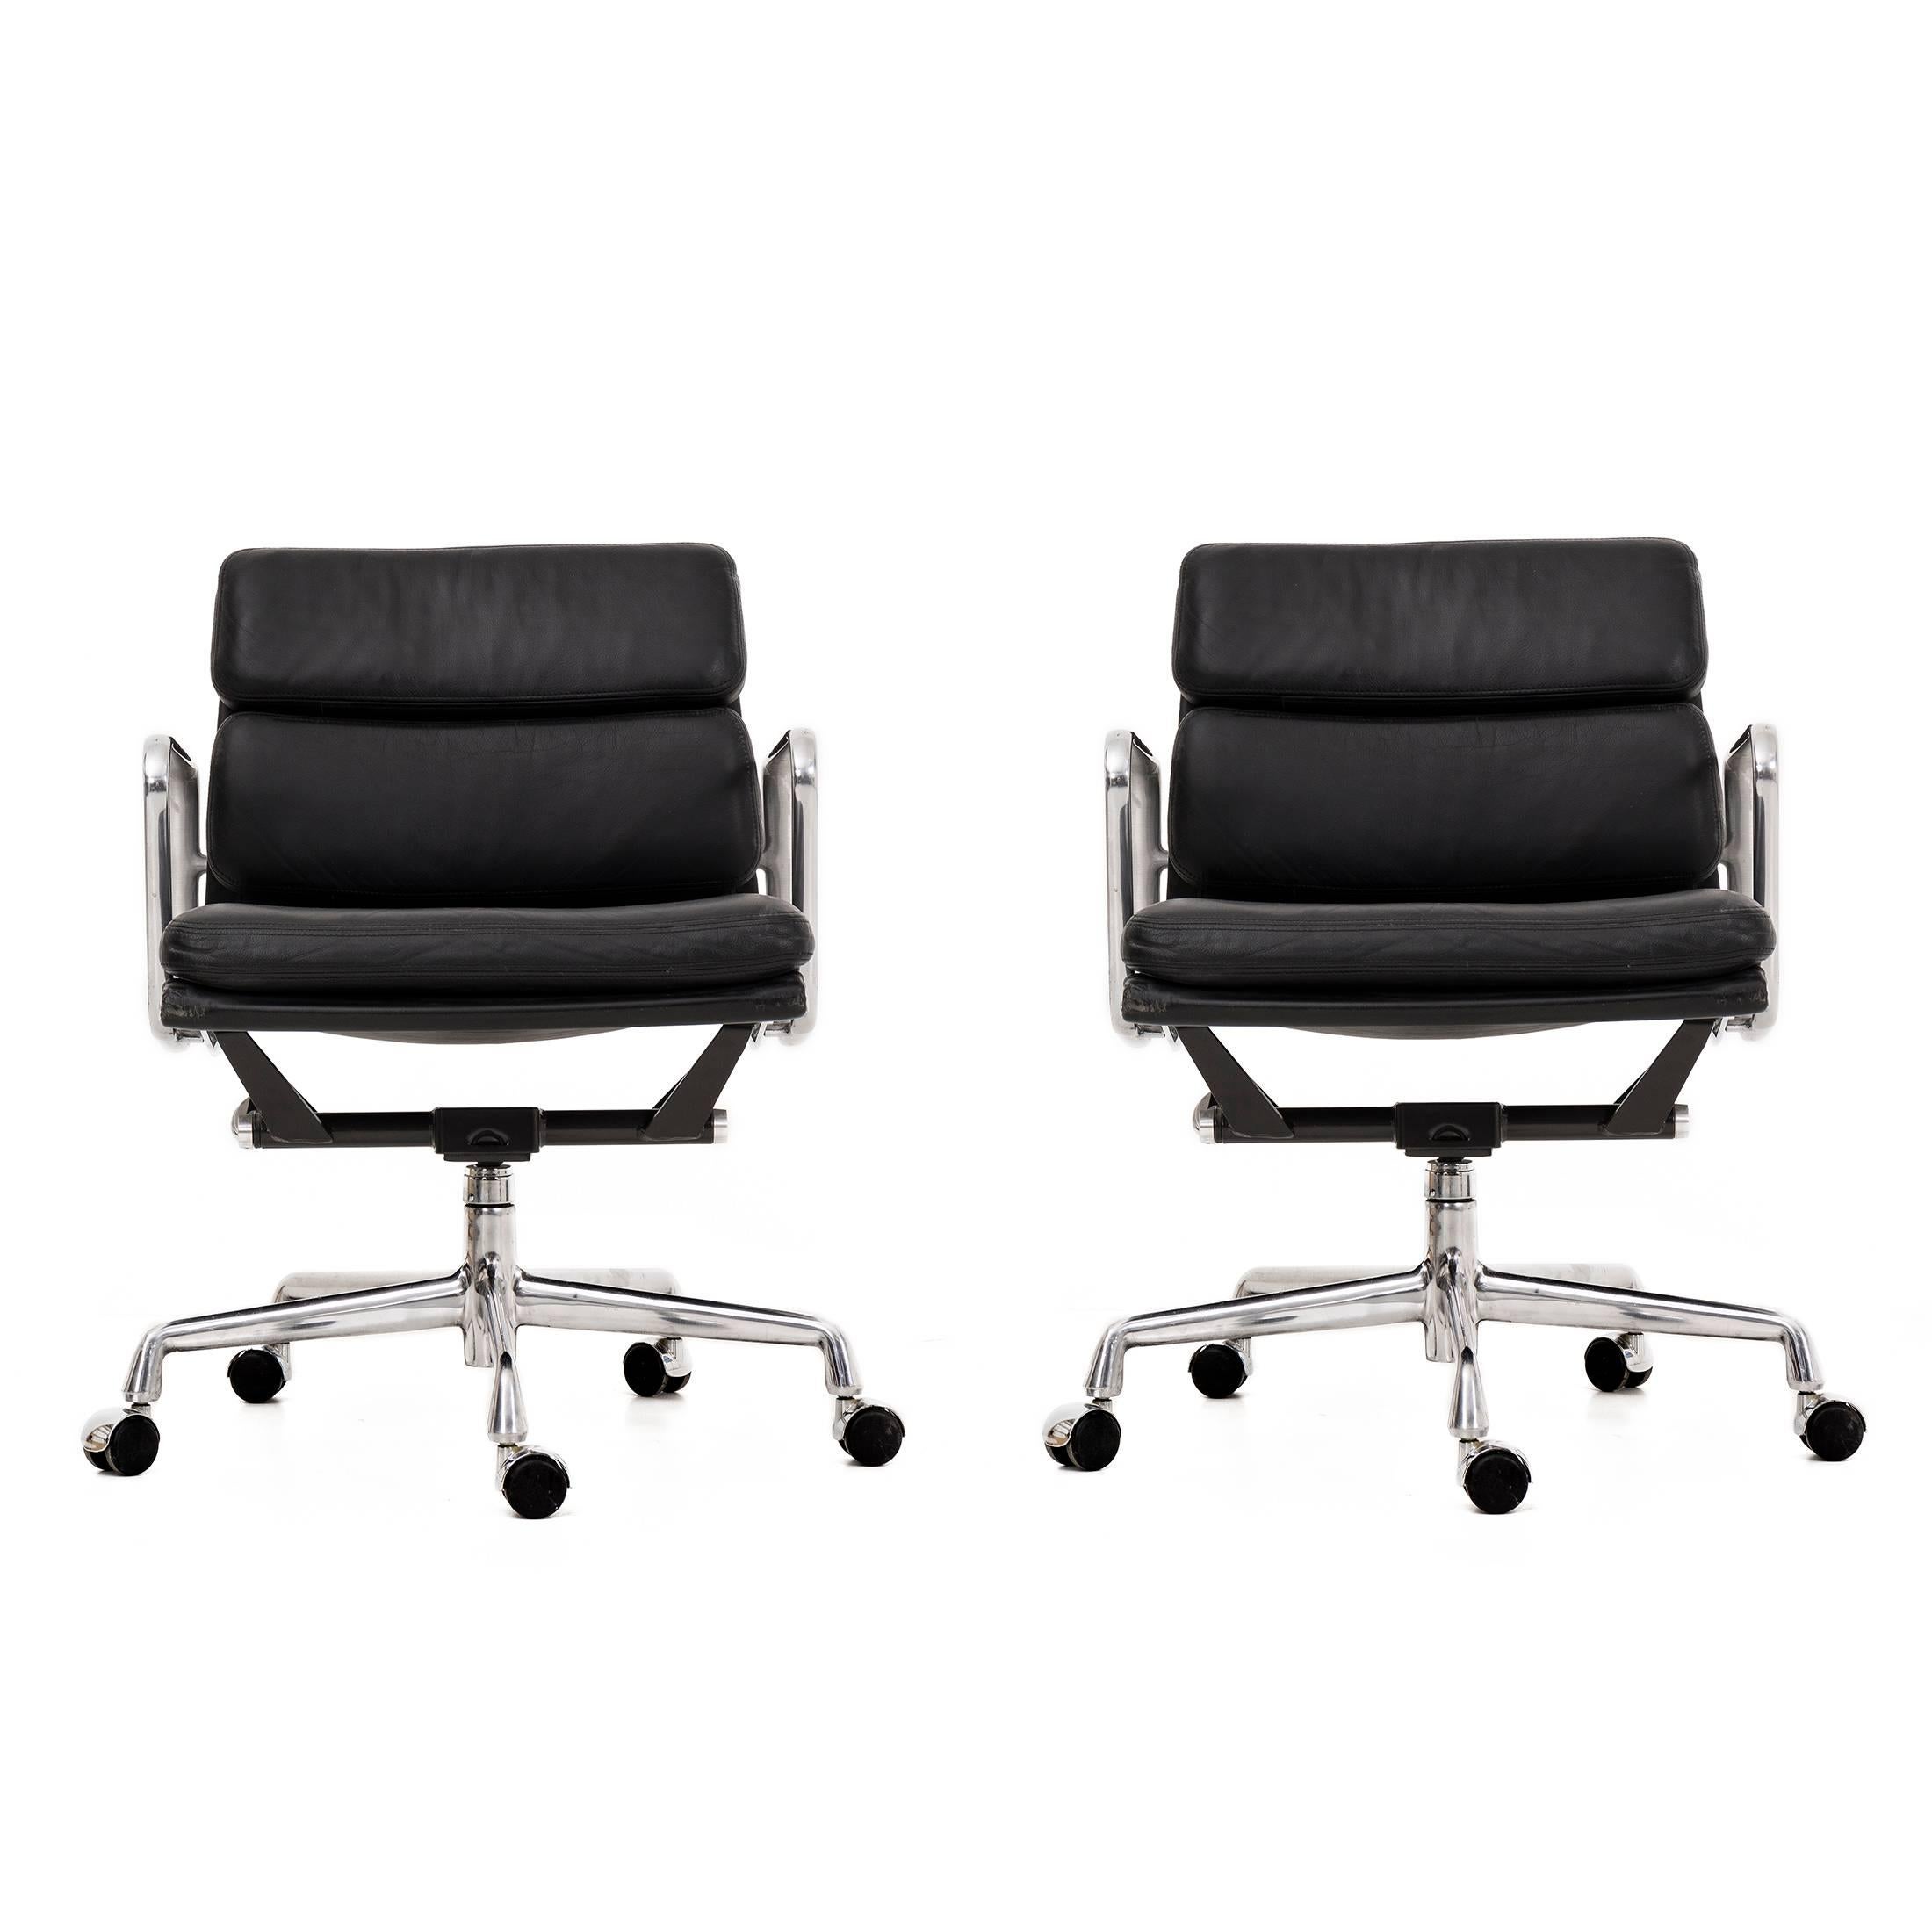 Pair of Charles Eames Soft Pad Chairs